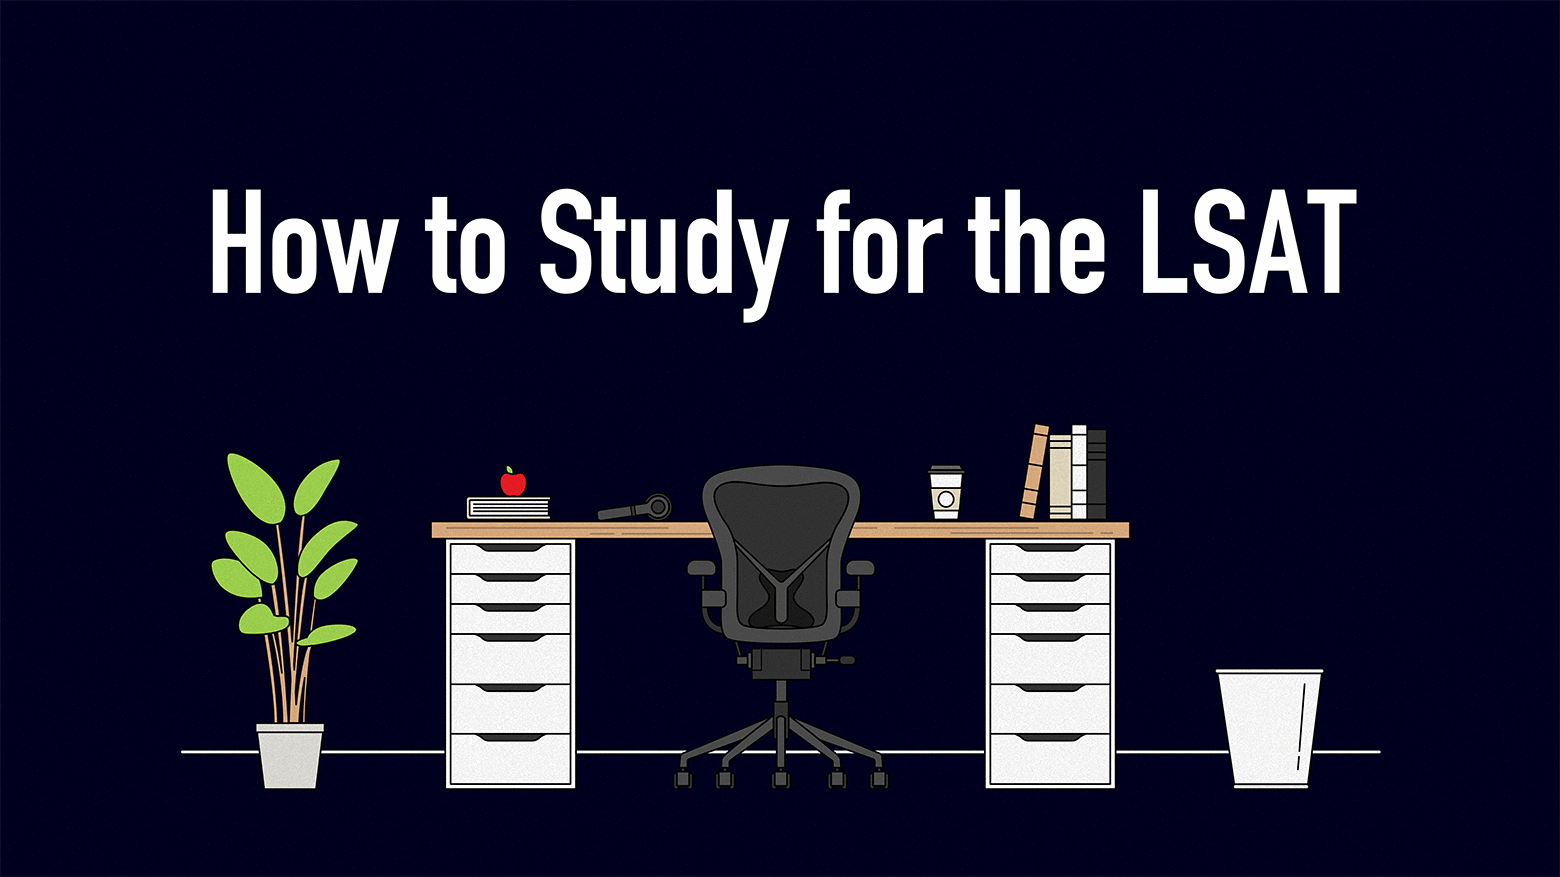 Essential Information About the LSAT and How to Best Prepare for it